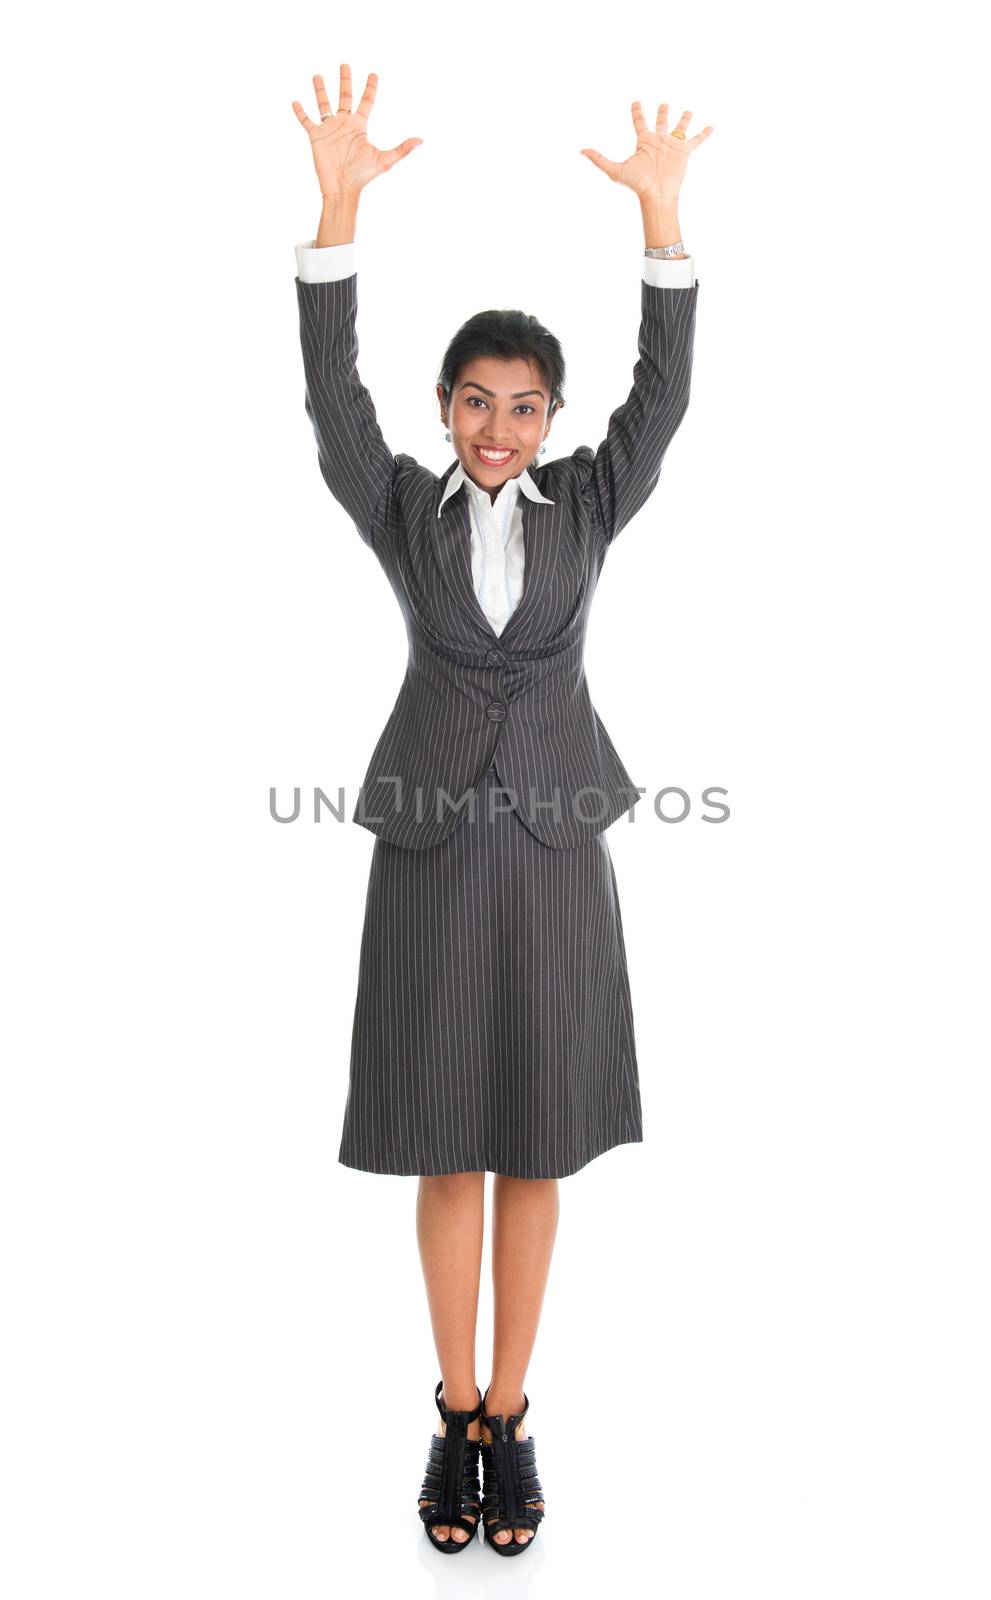 Indian business woman arms raised by szefei